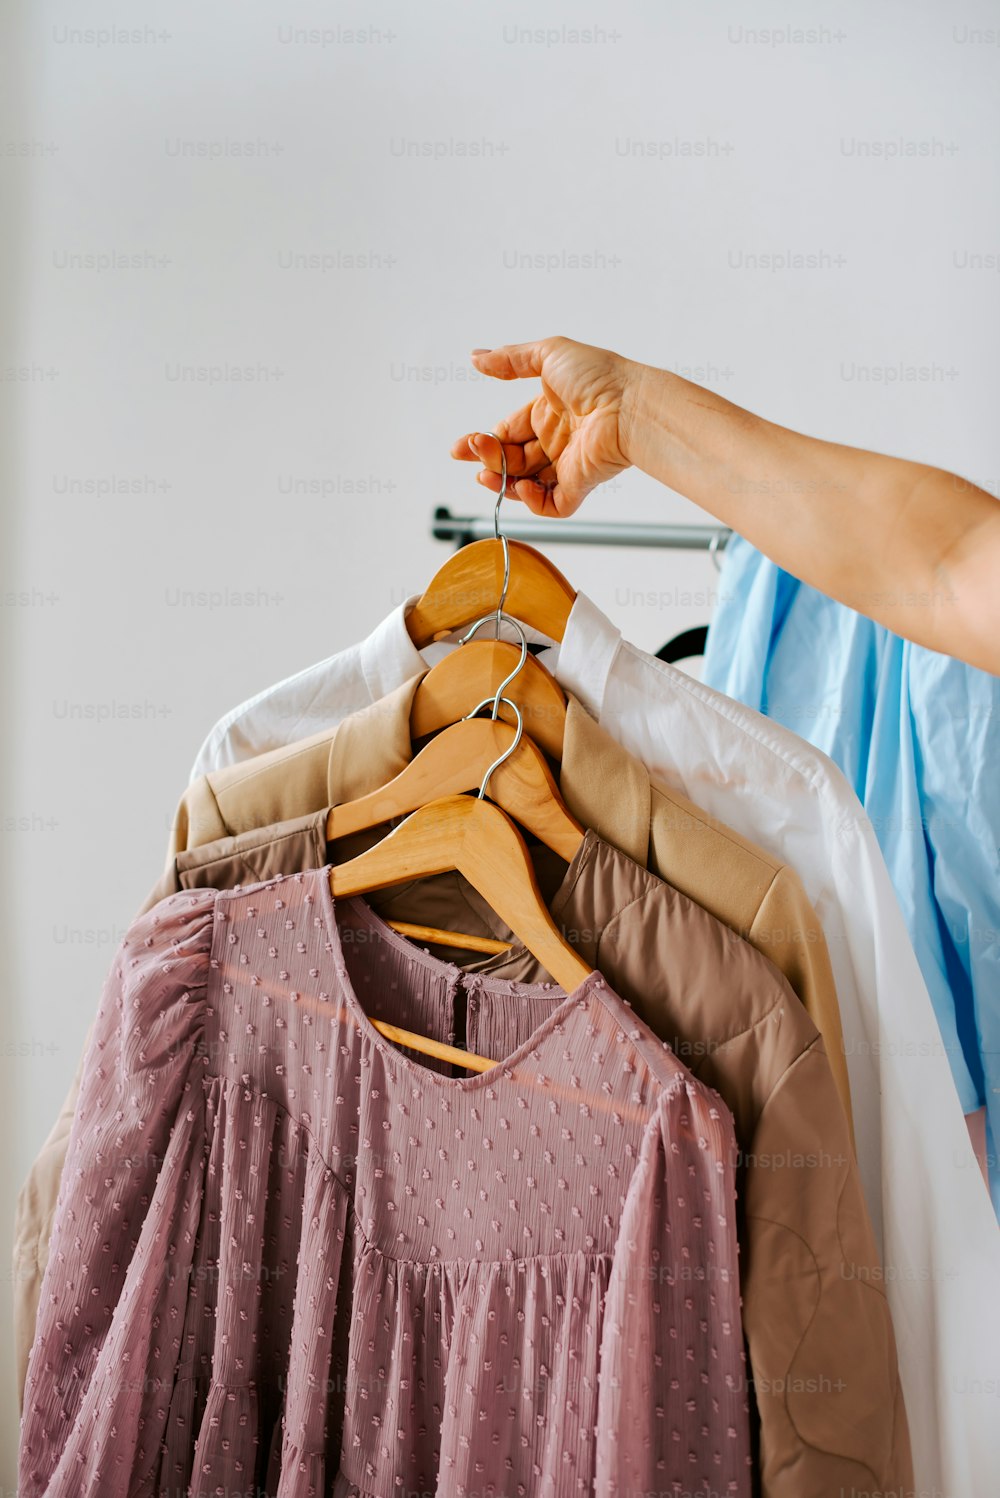 a woman's hand reaching for a shirt on a hanger